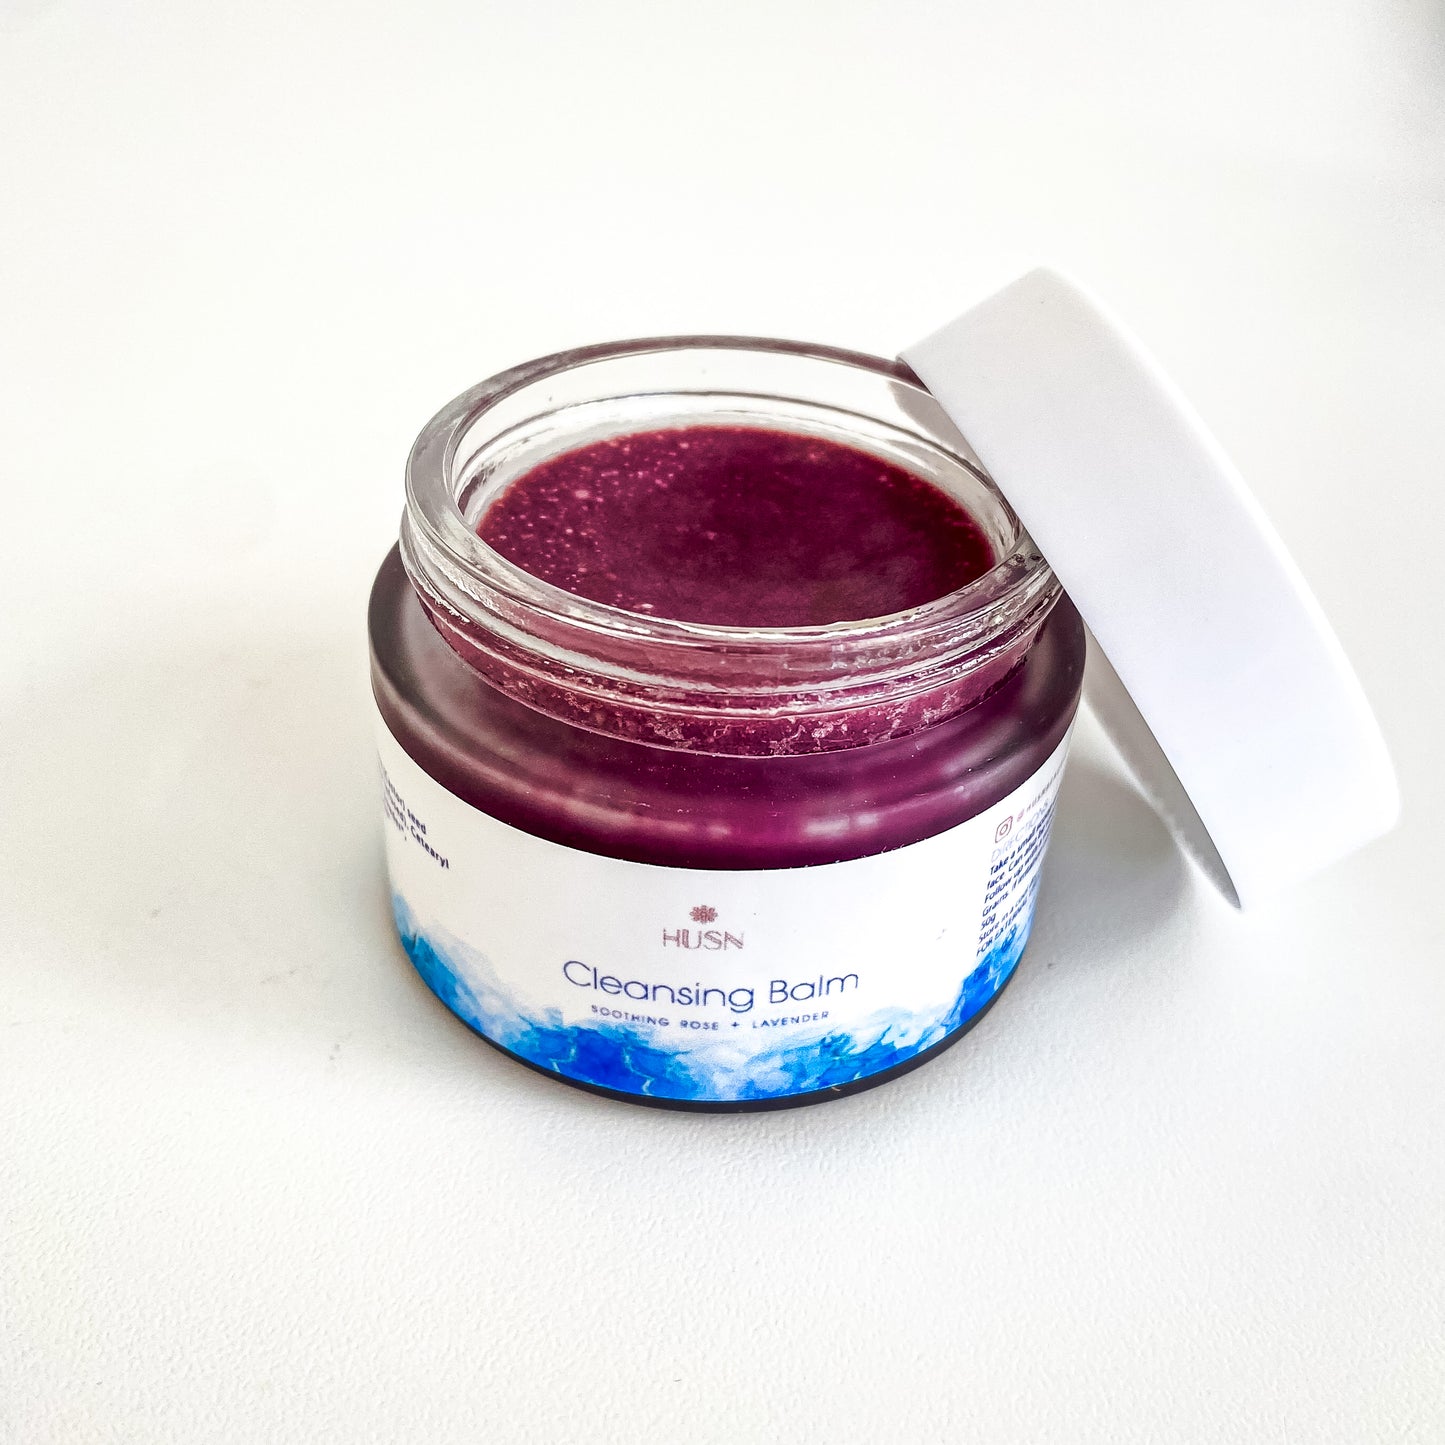 Cleansing Balm- Soothing Lavender + Rose